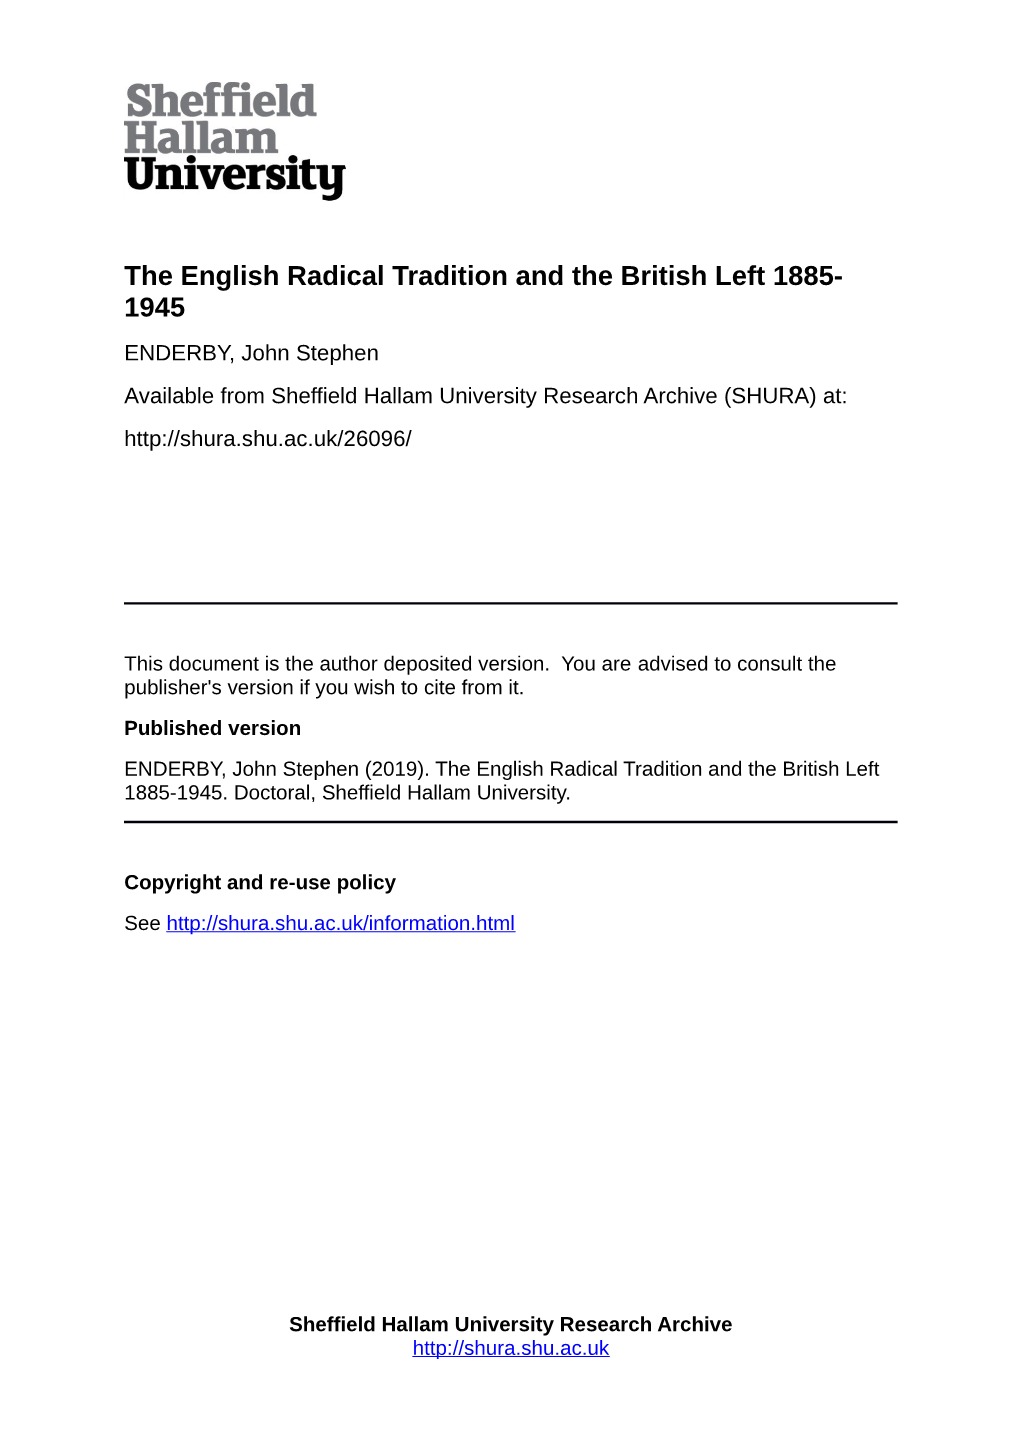 The English Radical Tradition and the British Left 1885